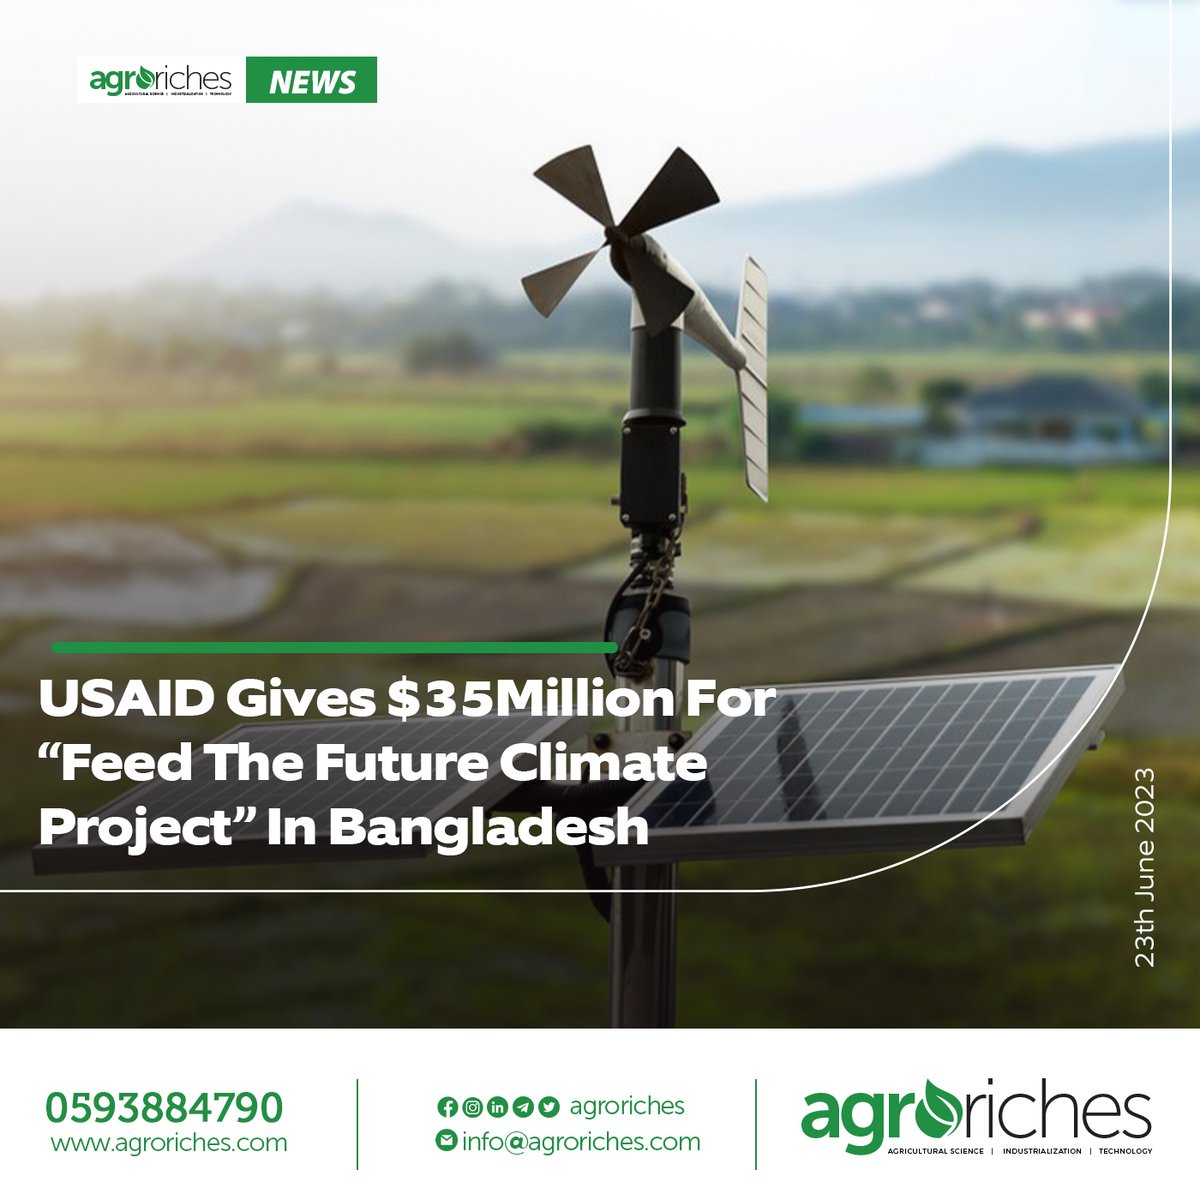 Agroriches: USAID Gives $35Million For “Feed The Future Climate Project” In Bangladesh

agroriches.com/feed-the-futur…

#future #bangladesh #project #agroriches #farm #agricuture #crop #world #agriculturenews #news #quality #farmers #news